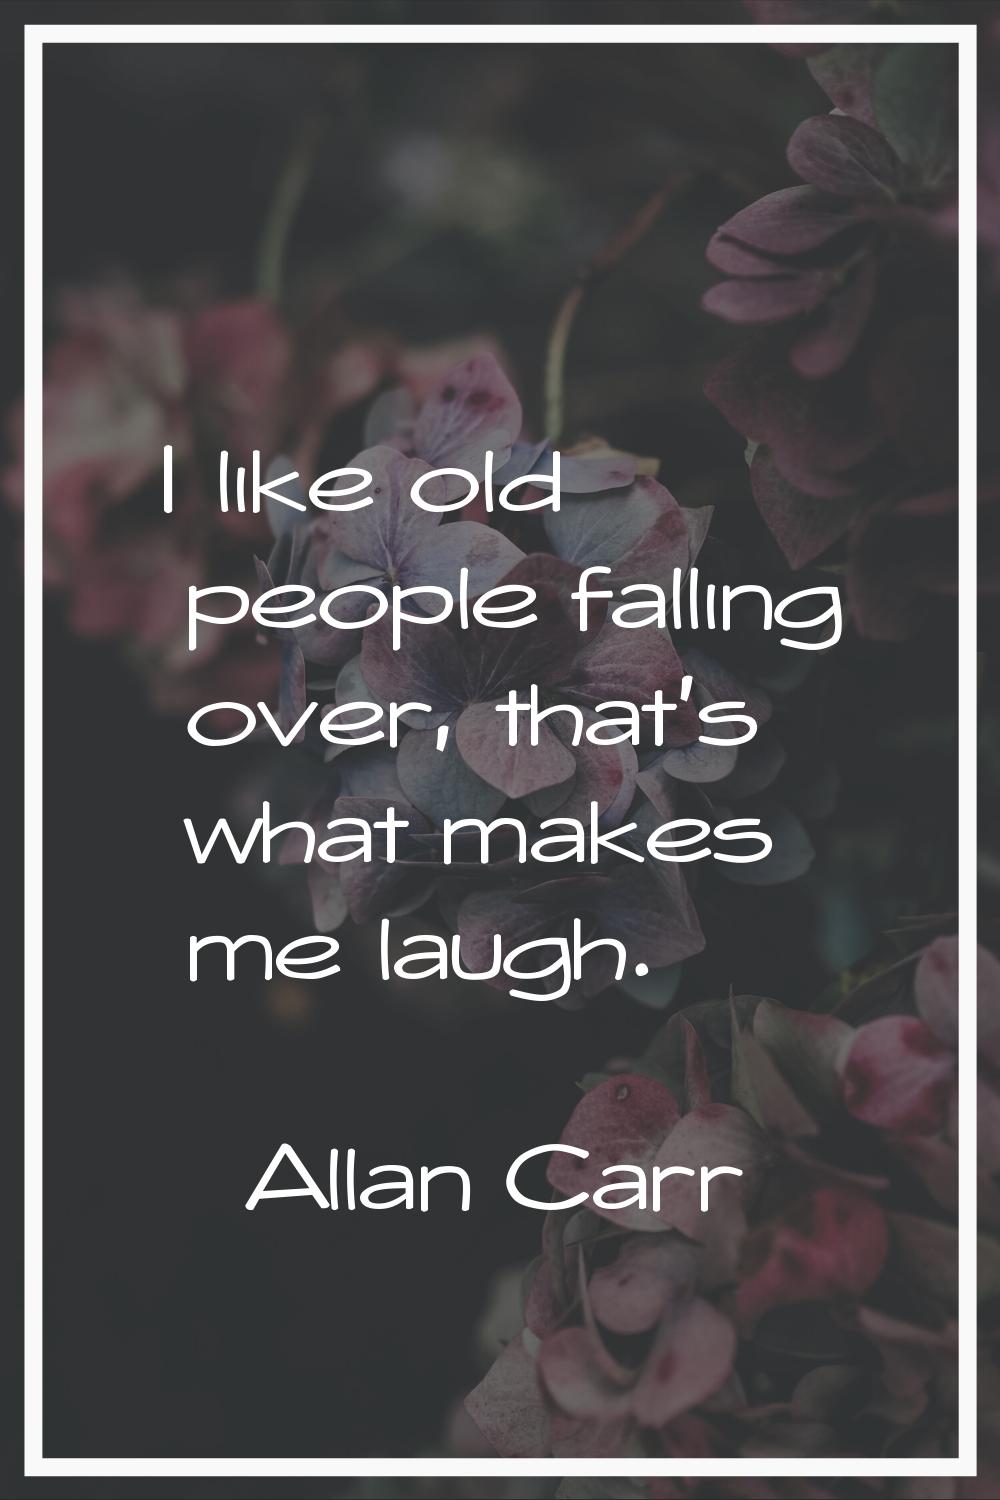 I like old people falling over, that's what makes me laugh.